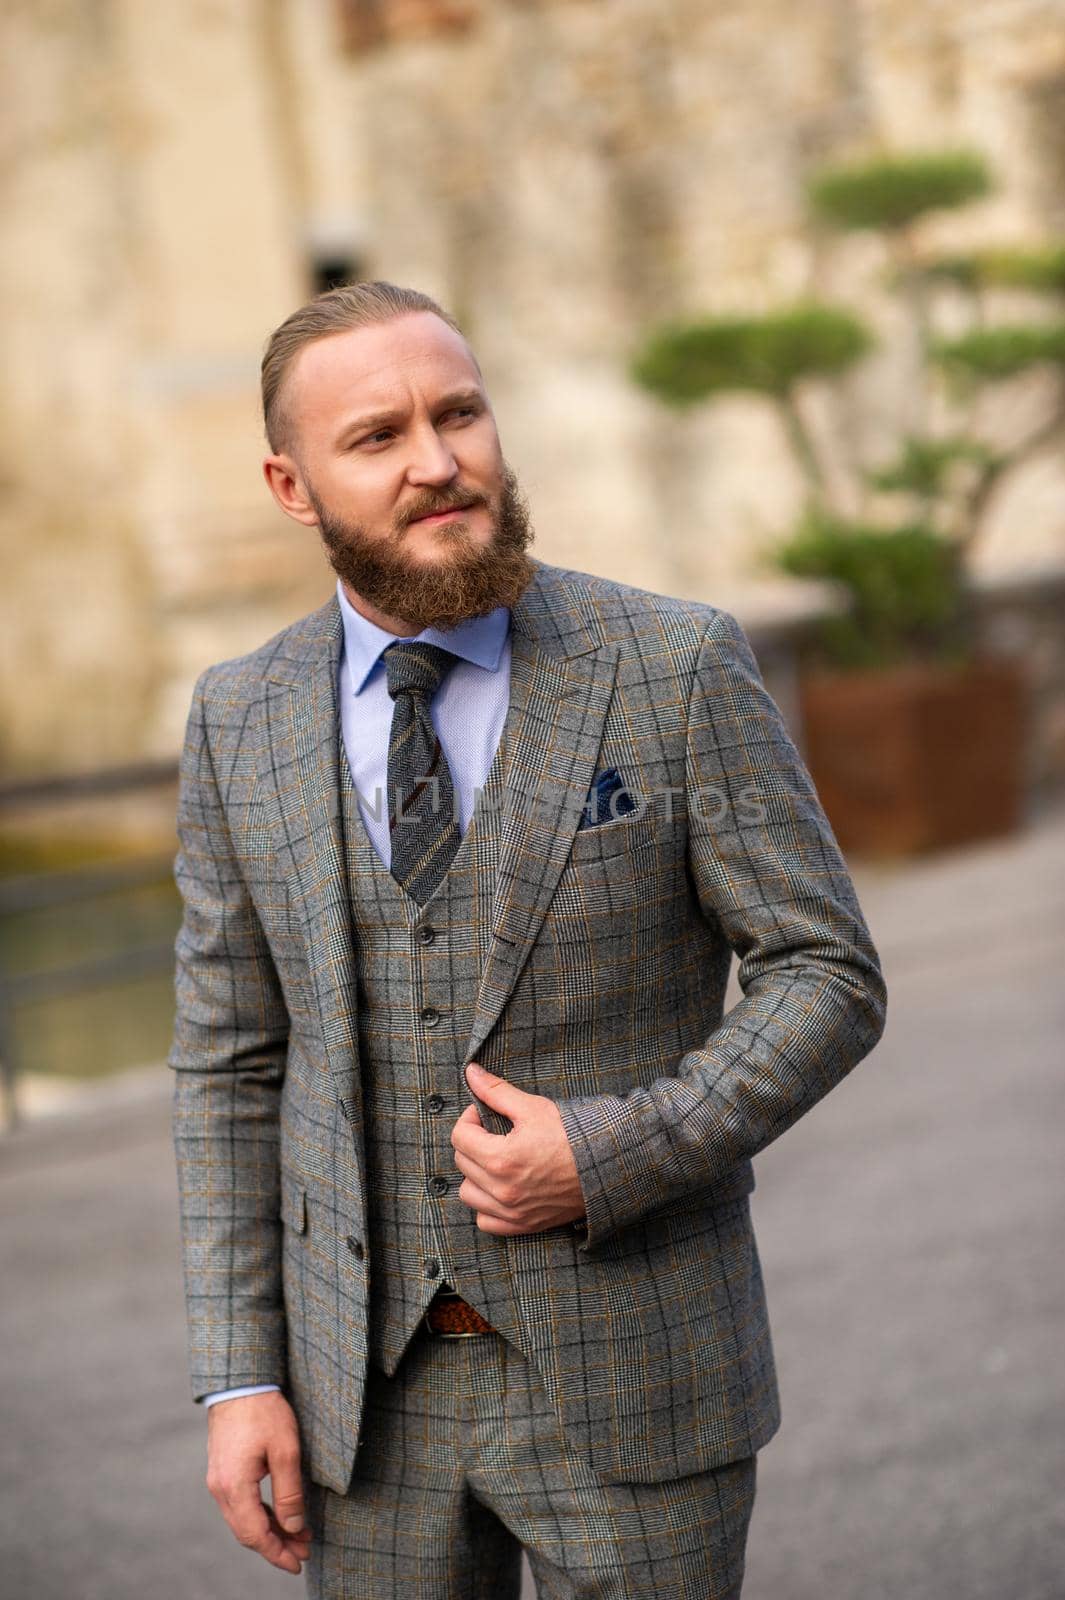 A man with a beard in a strict grey three-piece suit with a tie in the old town of Sirmione, a Stylish man in a grey suit in Italy.